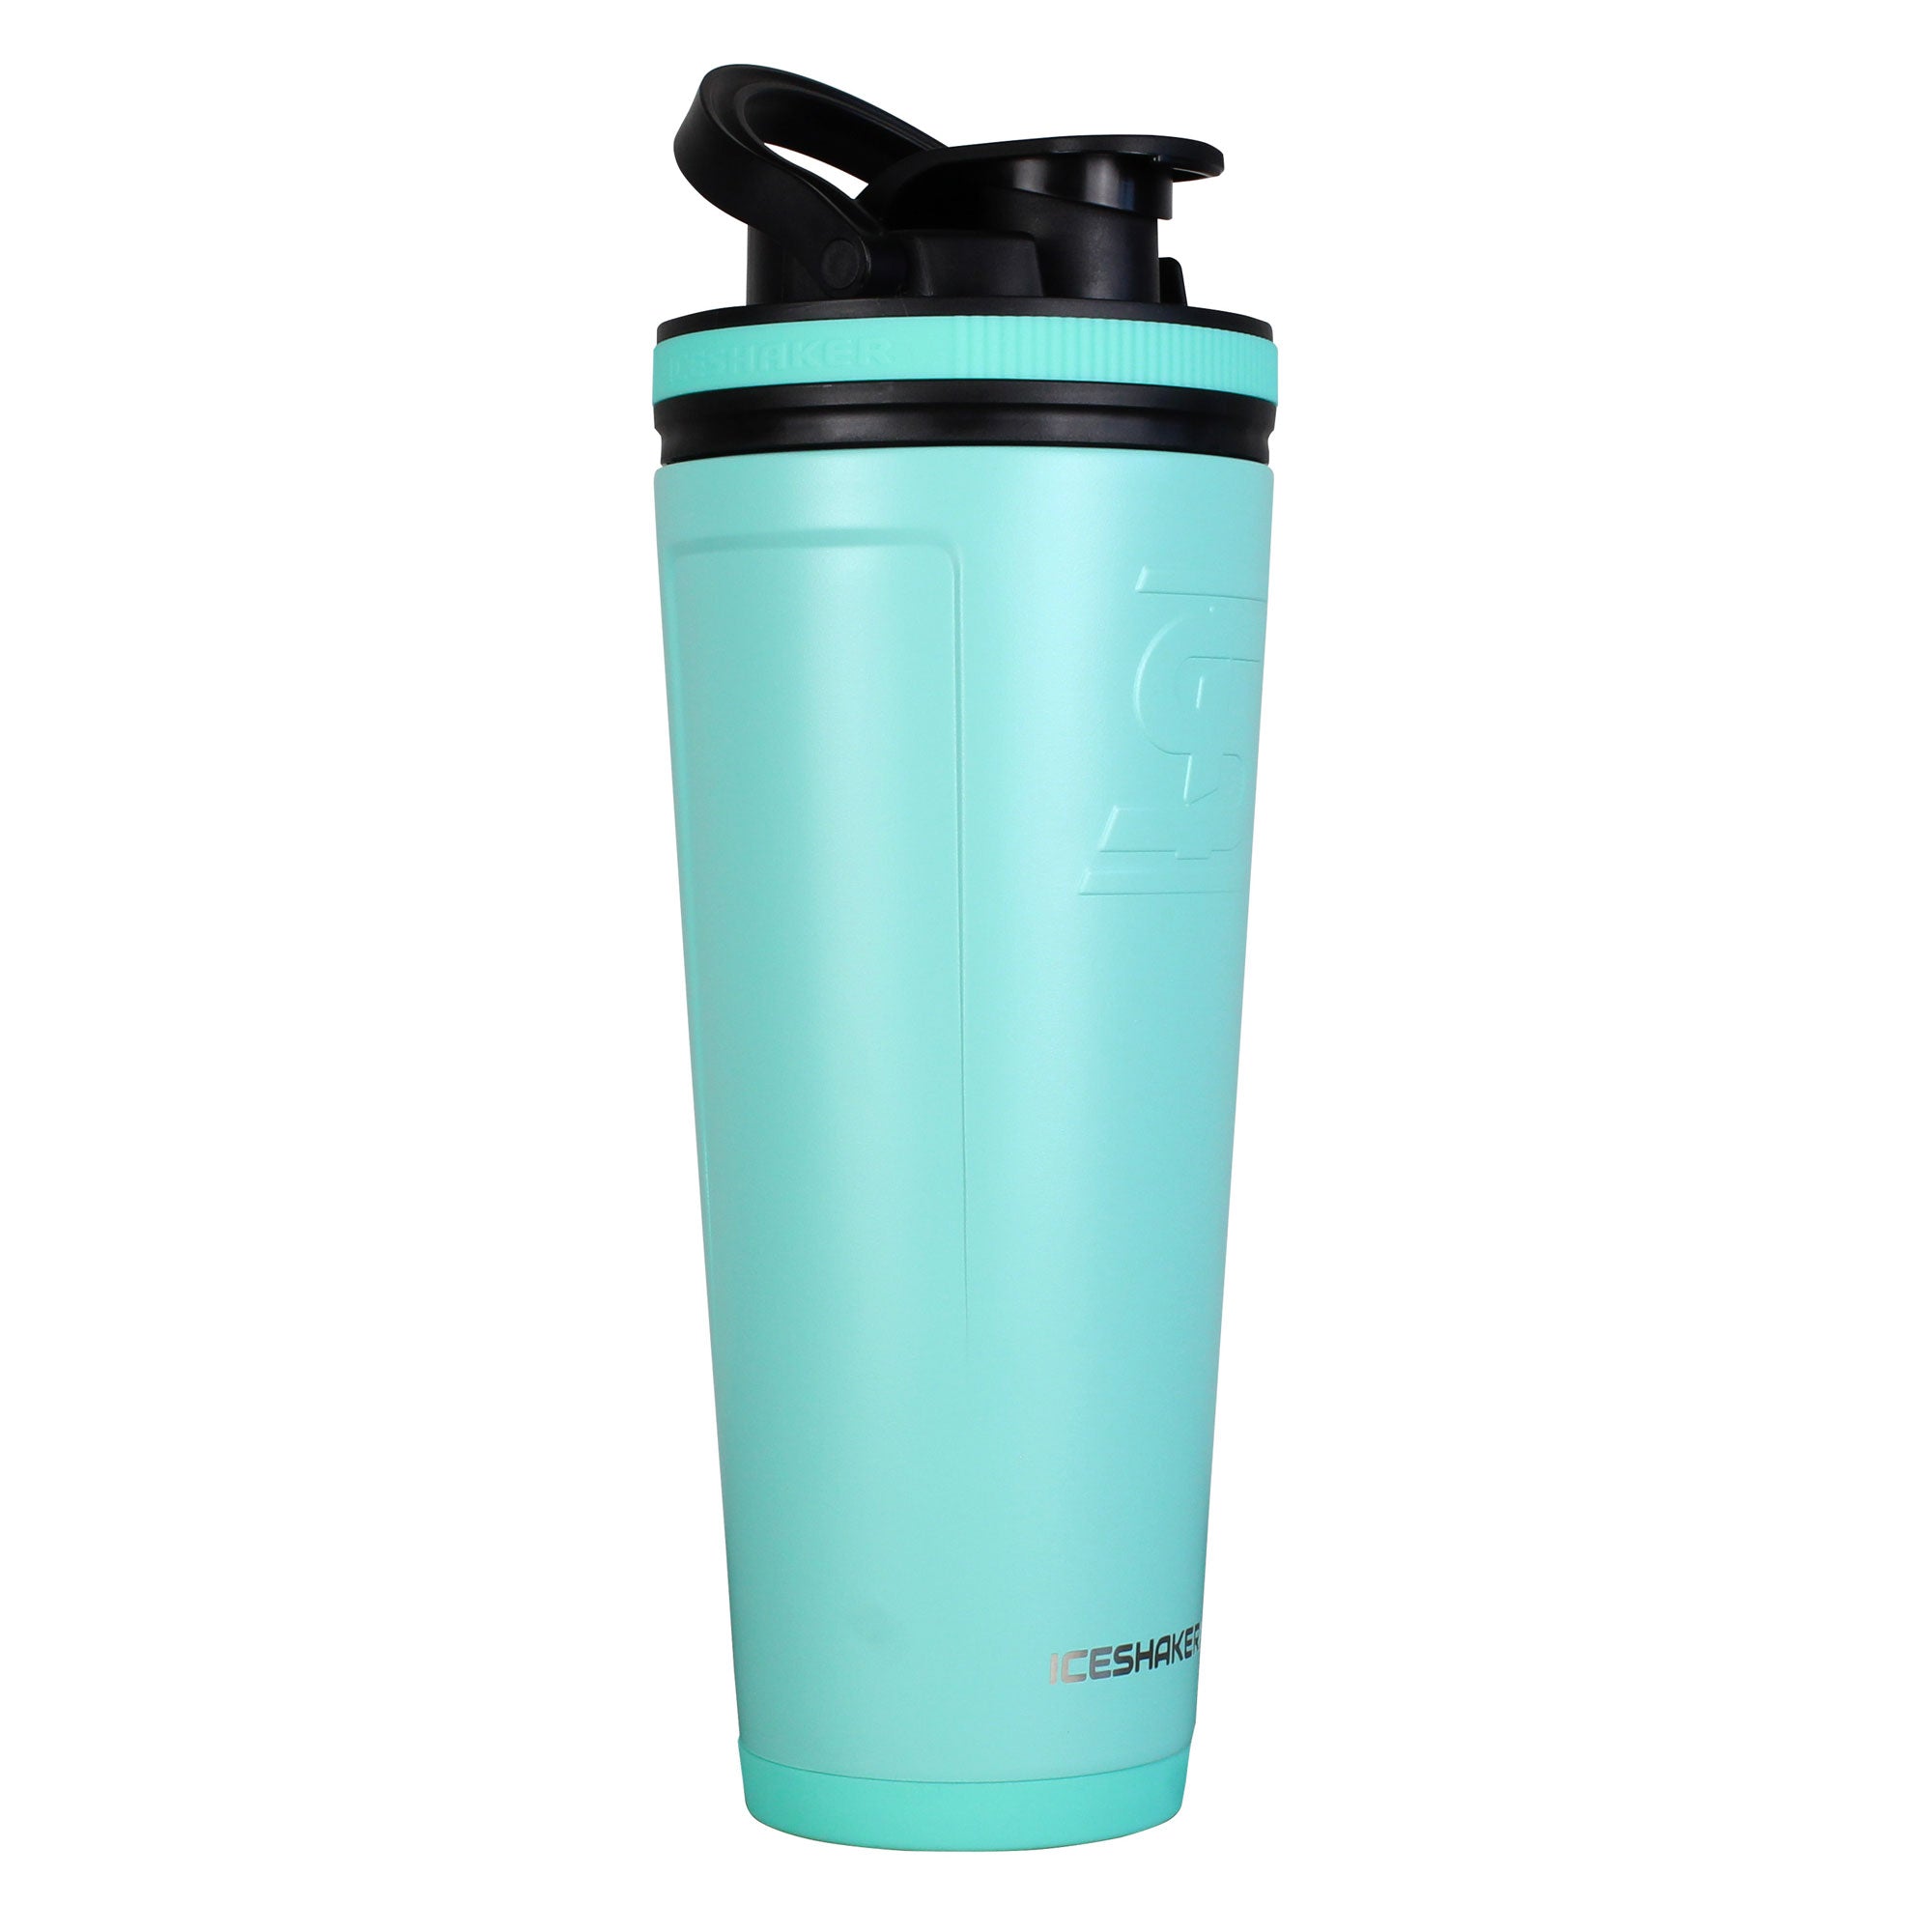 AVSAMOQ Protein Shaker Bottle with Powder Storage Container 16oz Shaker Cup  for Protein Mixes - Atta…See more AVSAMOQ Protein Shaker Bottle with